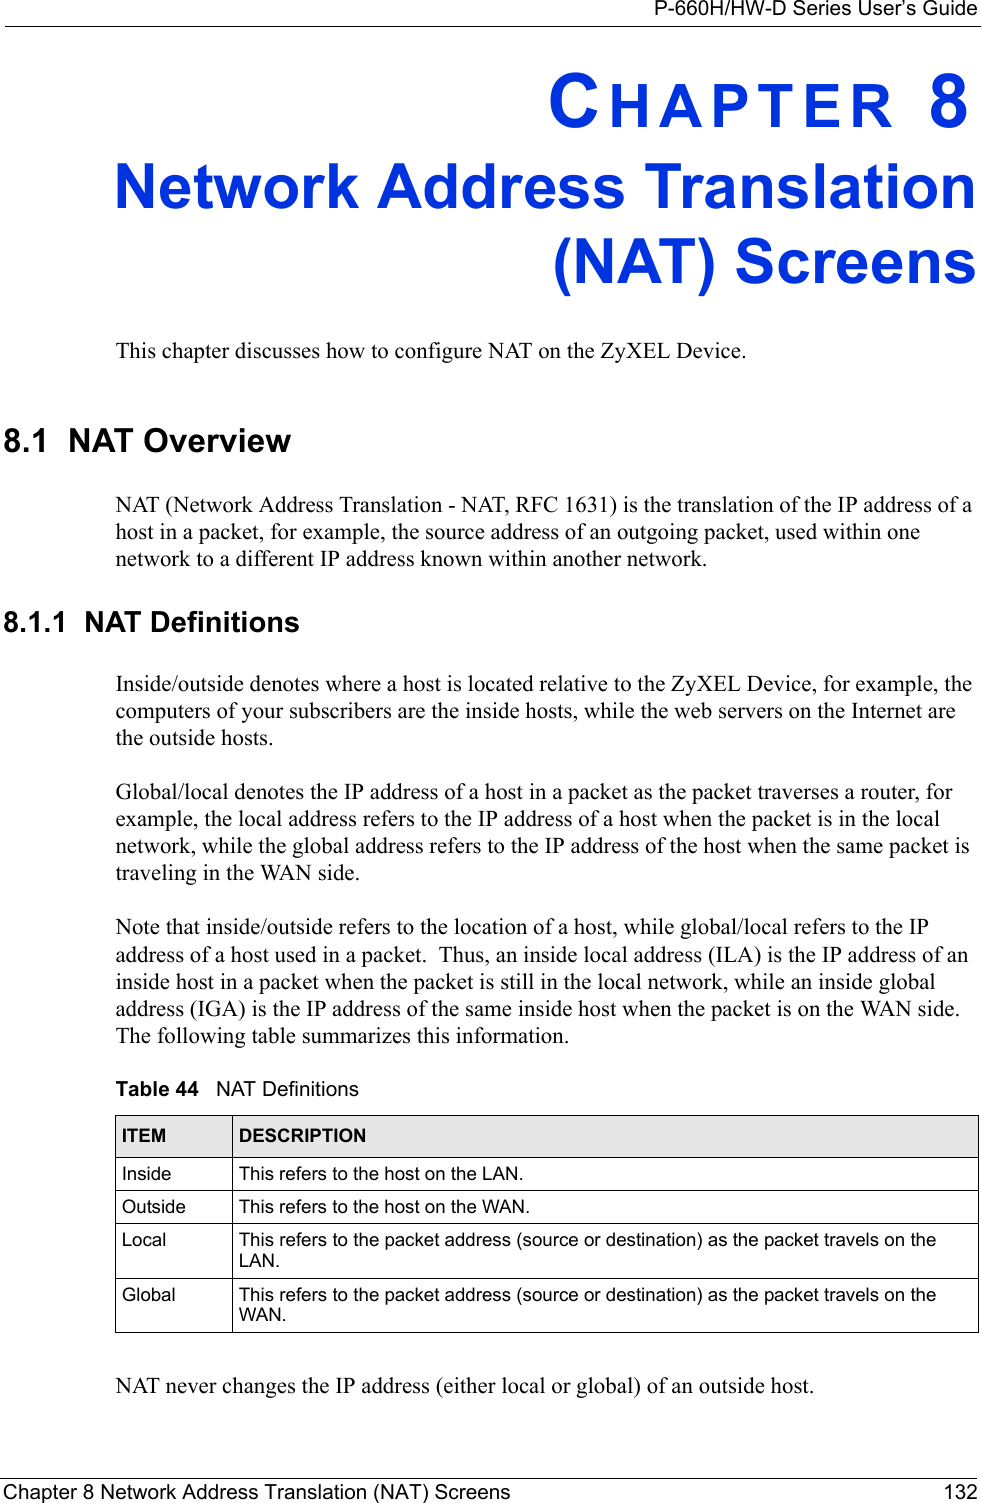 P-660H/HW-D Series User’s GuideChapter 8 Network Address Translation (NAT) Screens 132CHAPTER 8Network Address Translation(NAT) ScreensThis chapter discusses how to configure NAT on the ZyXEL Device.8.1  NAT Overview NAT (Network Address Translation - NAT, RFC 1631) is the translation of the IP address of a host in a packet, for example, the source address of an outgoing packet, used within one network to a different IP address known within another network. 8.1.1  NAT DefinitionsInside/outside denotes where a host is located relative to the ZyXEL Device, for example, the computers of your subscribers are the inside hosts, while the web servers on the Internet are the outside hosts. Global/local denotes the IP address of a host in a packet as the packet traverses a router, for example, the local address refers to the IP address of a host when the packet is in the local network, while the global address refers to the IP address of the host when the same packet is traveling in the WAN side. Note that inside/outside refers to the location of a host, while global/local refers to the IP address of a host used in a packet.  Thus, an inside local address (ILA) is the IP address of an inside host in a packet when the packet is still in the local network, while an inside global address (IGA) is the IP address of the same inside host when the packet is on the WAN side. The following table summarizes this information.NAT never changes the IP address (either local or global) of an outside host.Table 44   NAT DefinitionsITEM DESCRIPTIONInside This refers to the host on the LAN.Outside This refers to the host on the WAN.Local This refers to the packet address (source or destination) as the packet travels on the LAN.Global This refers to the packet address (source or destination) as the packet travels on the WAN.